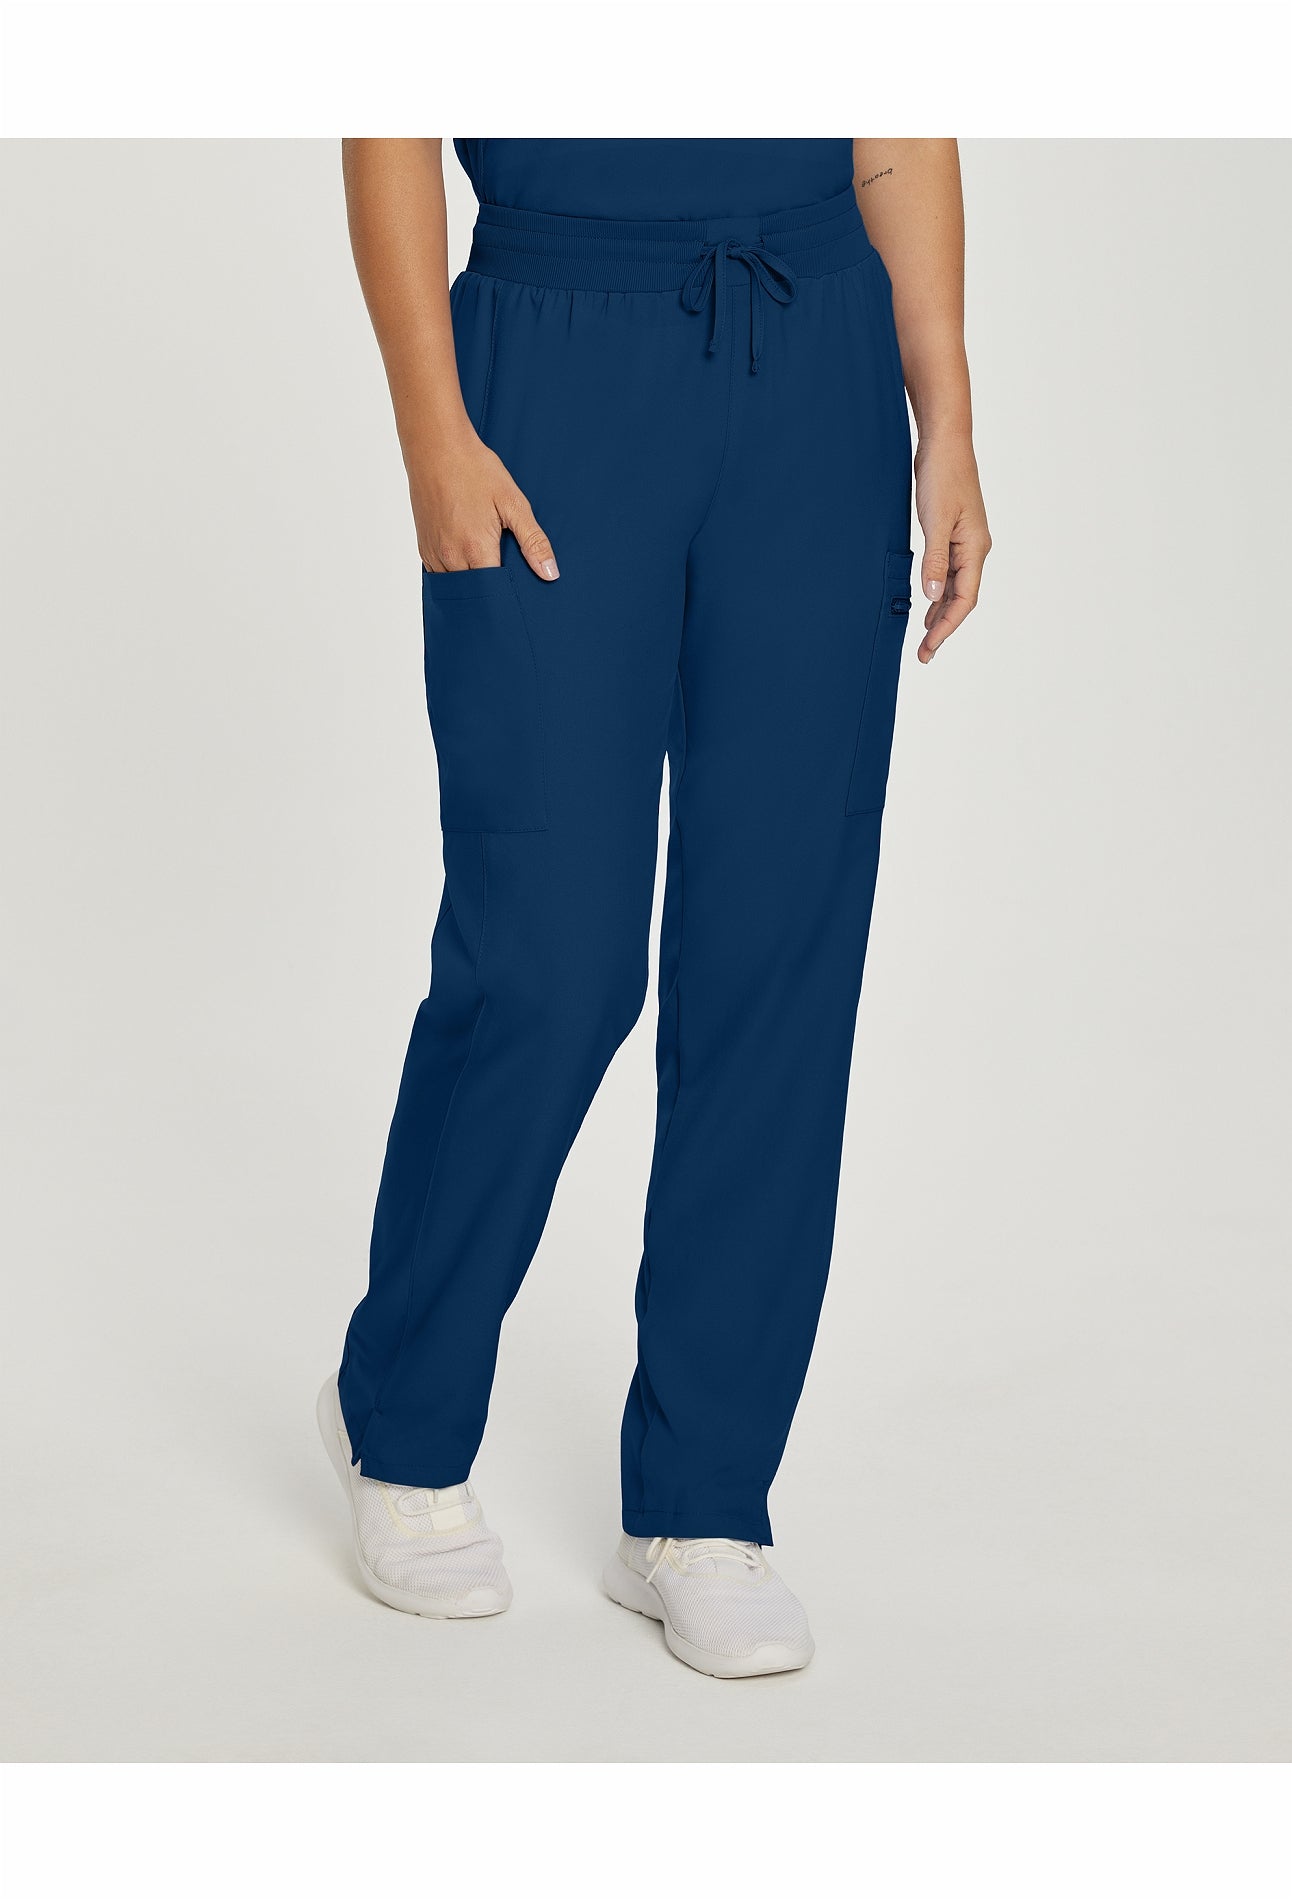 Navy Blue Women's Drawstring Waistband Fitted Pants 960 - The Nursing Store  Inc.